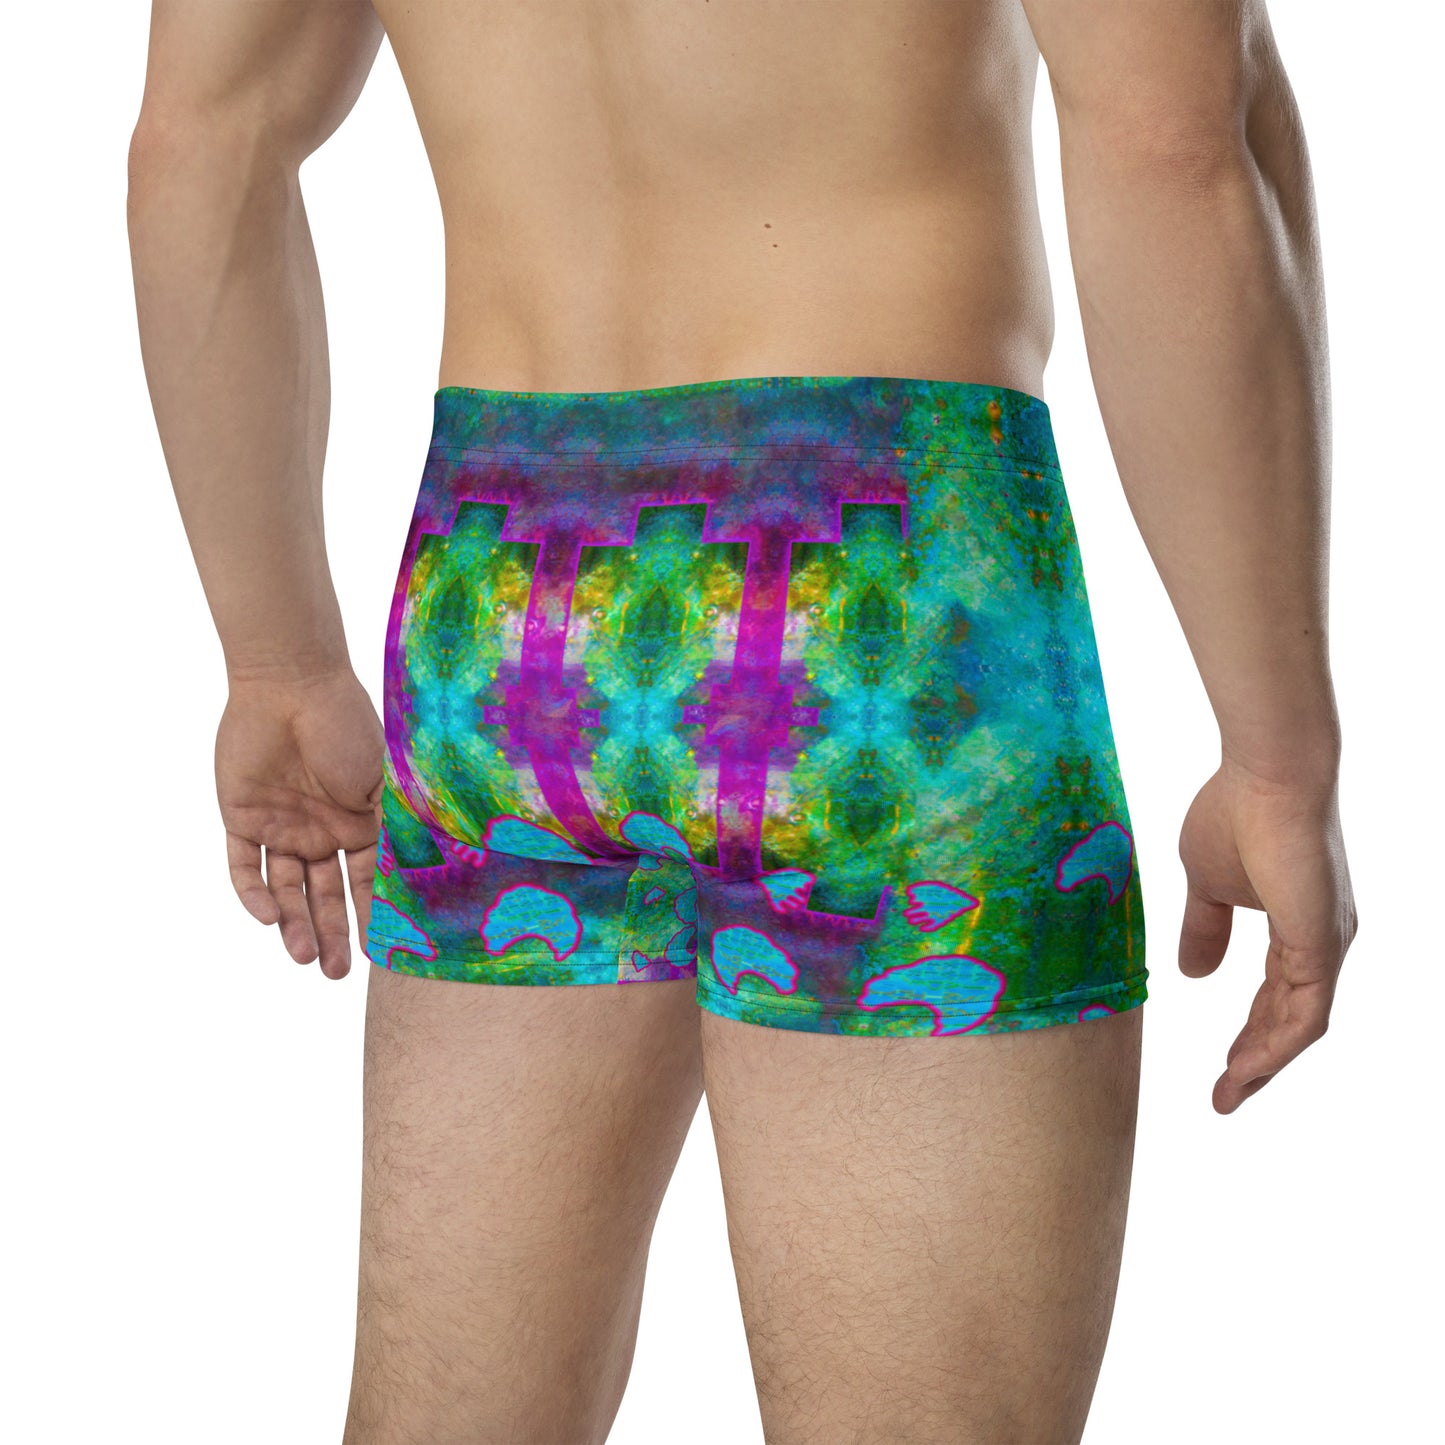 Boxer Briefs (His/They) RJSTH@Fabric#11 RJSTHs2020 RJS